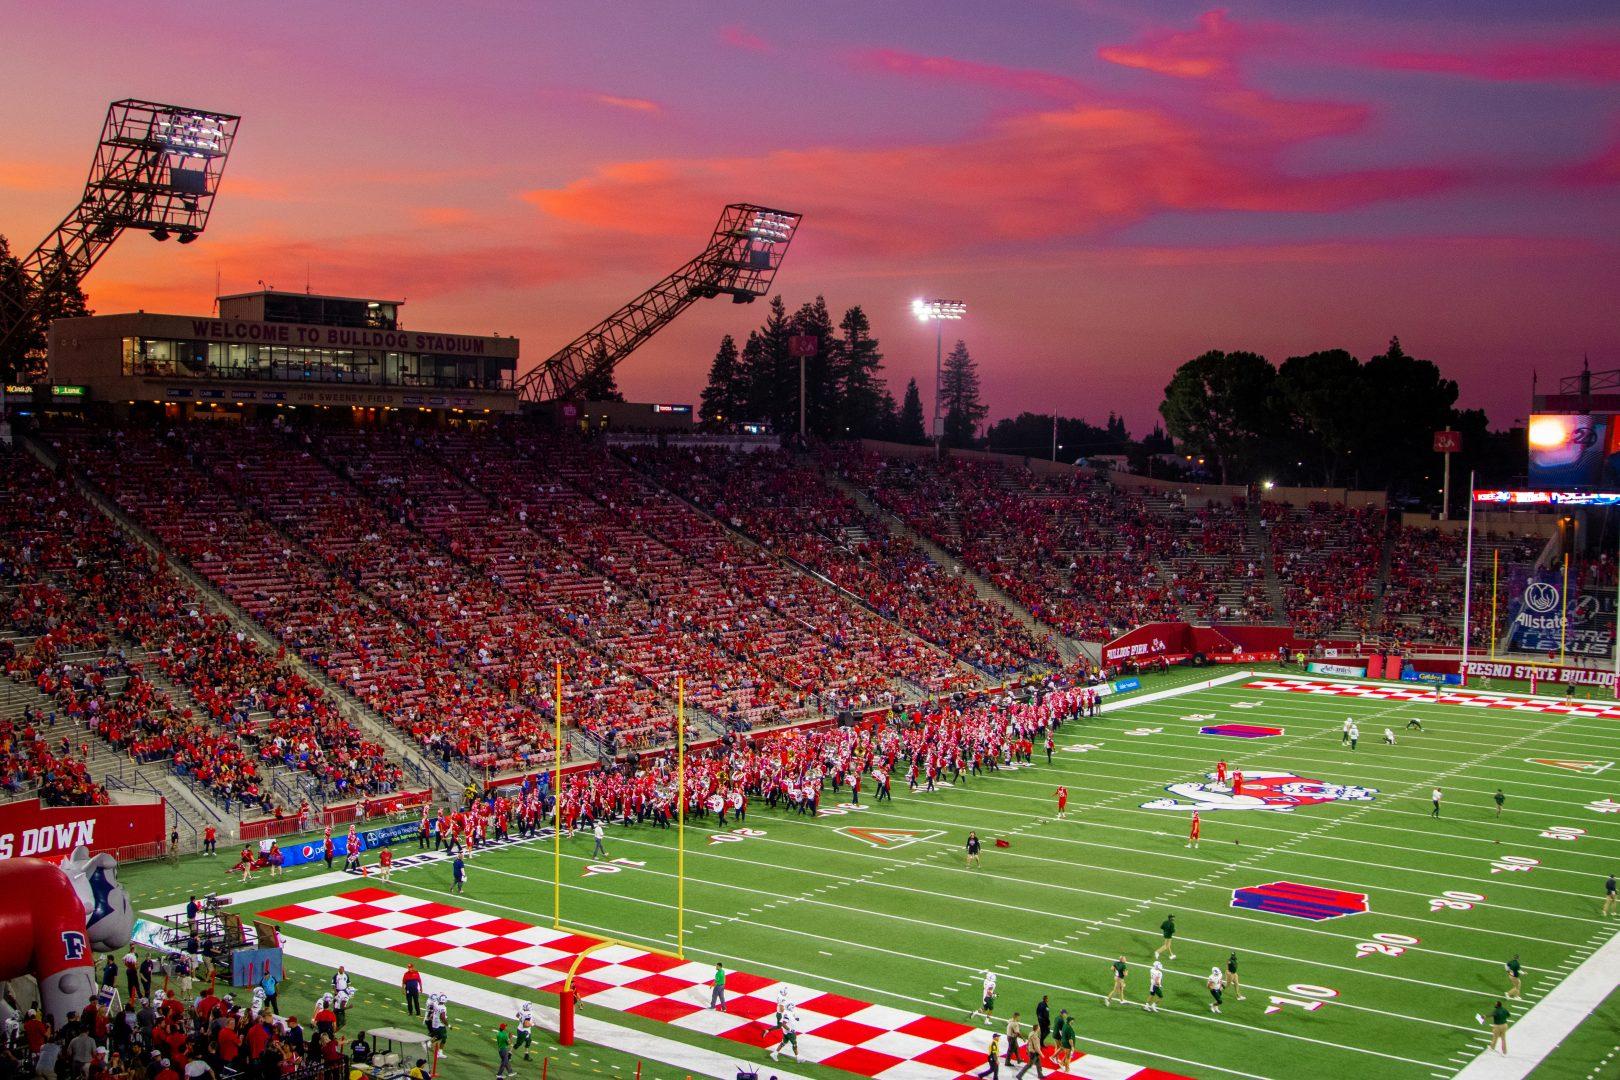 Fresno State’s new head coach Kalen DeBoer signed 12 recruits this offseason, bringing in a class that ranked No. 3 in terms of average rating per recruit. (Armando Carreno/The Collegian)